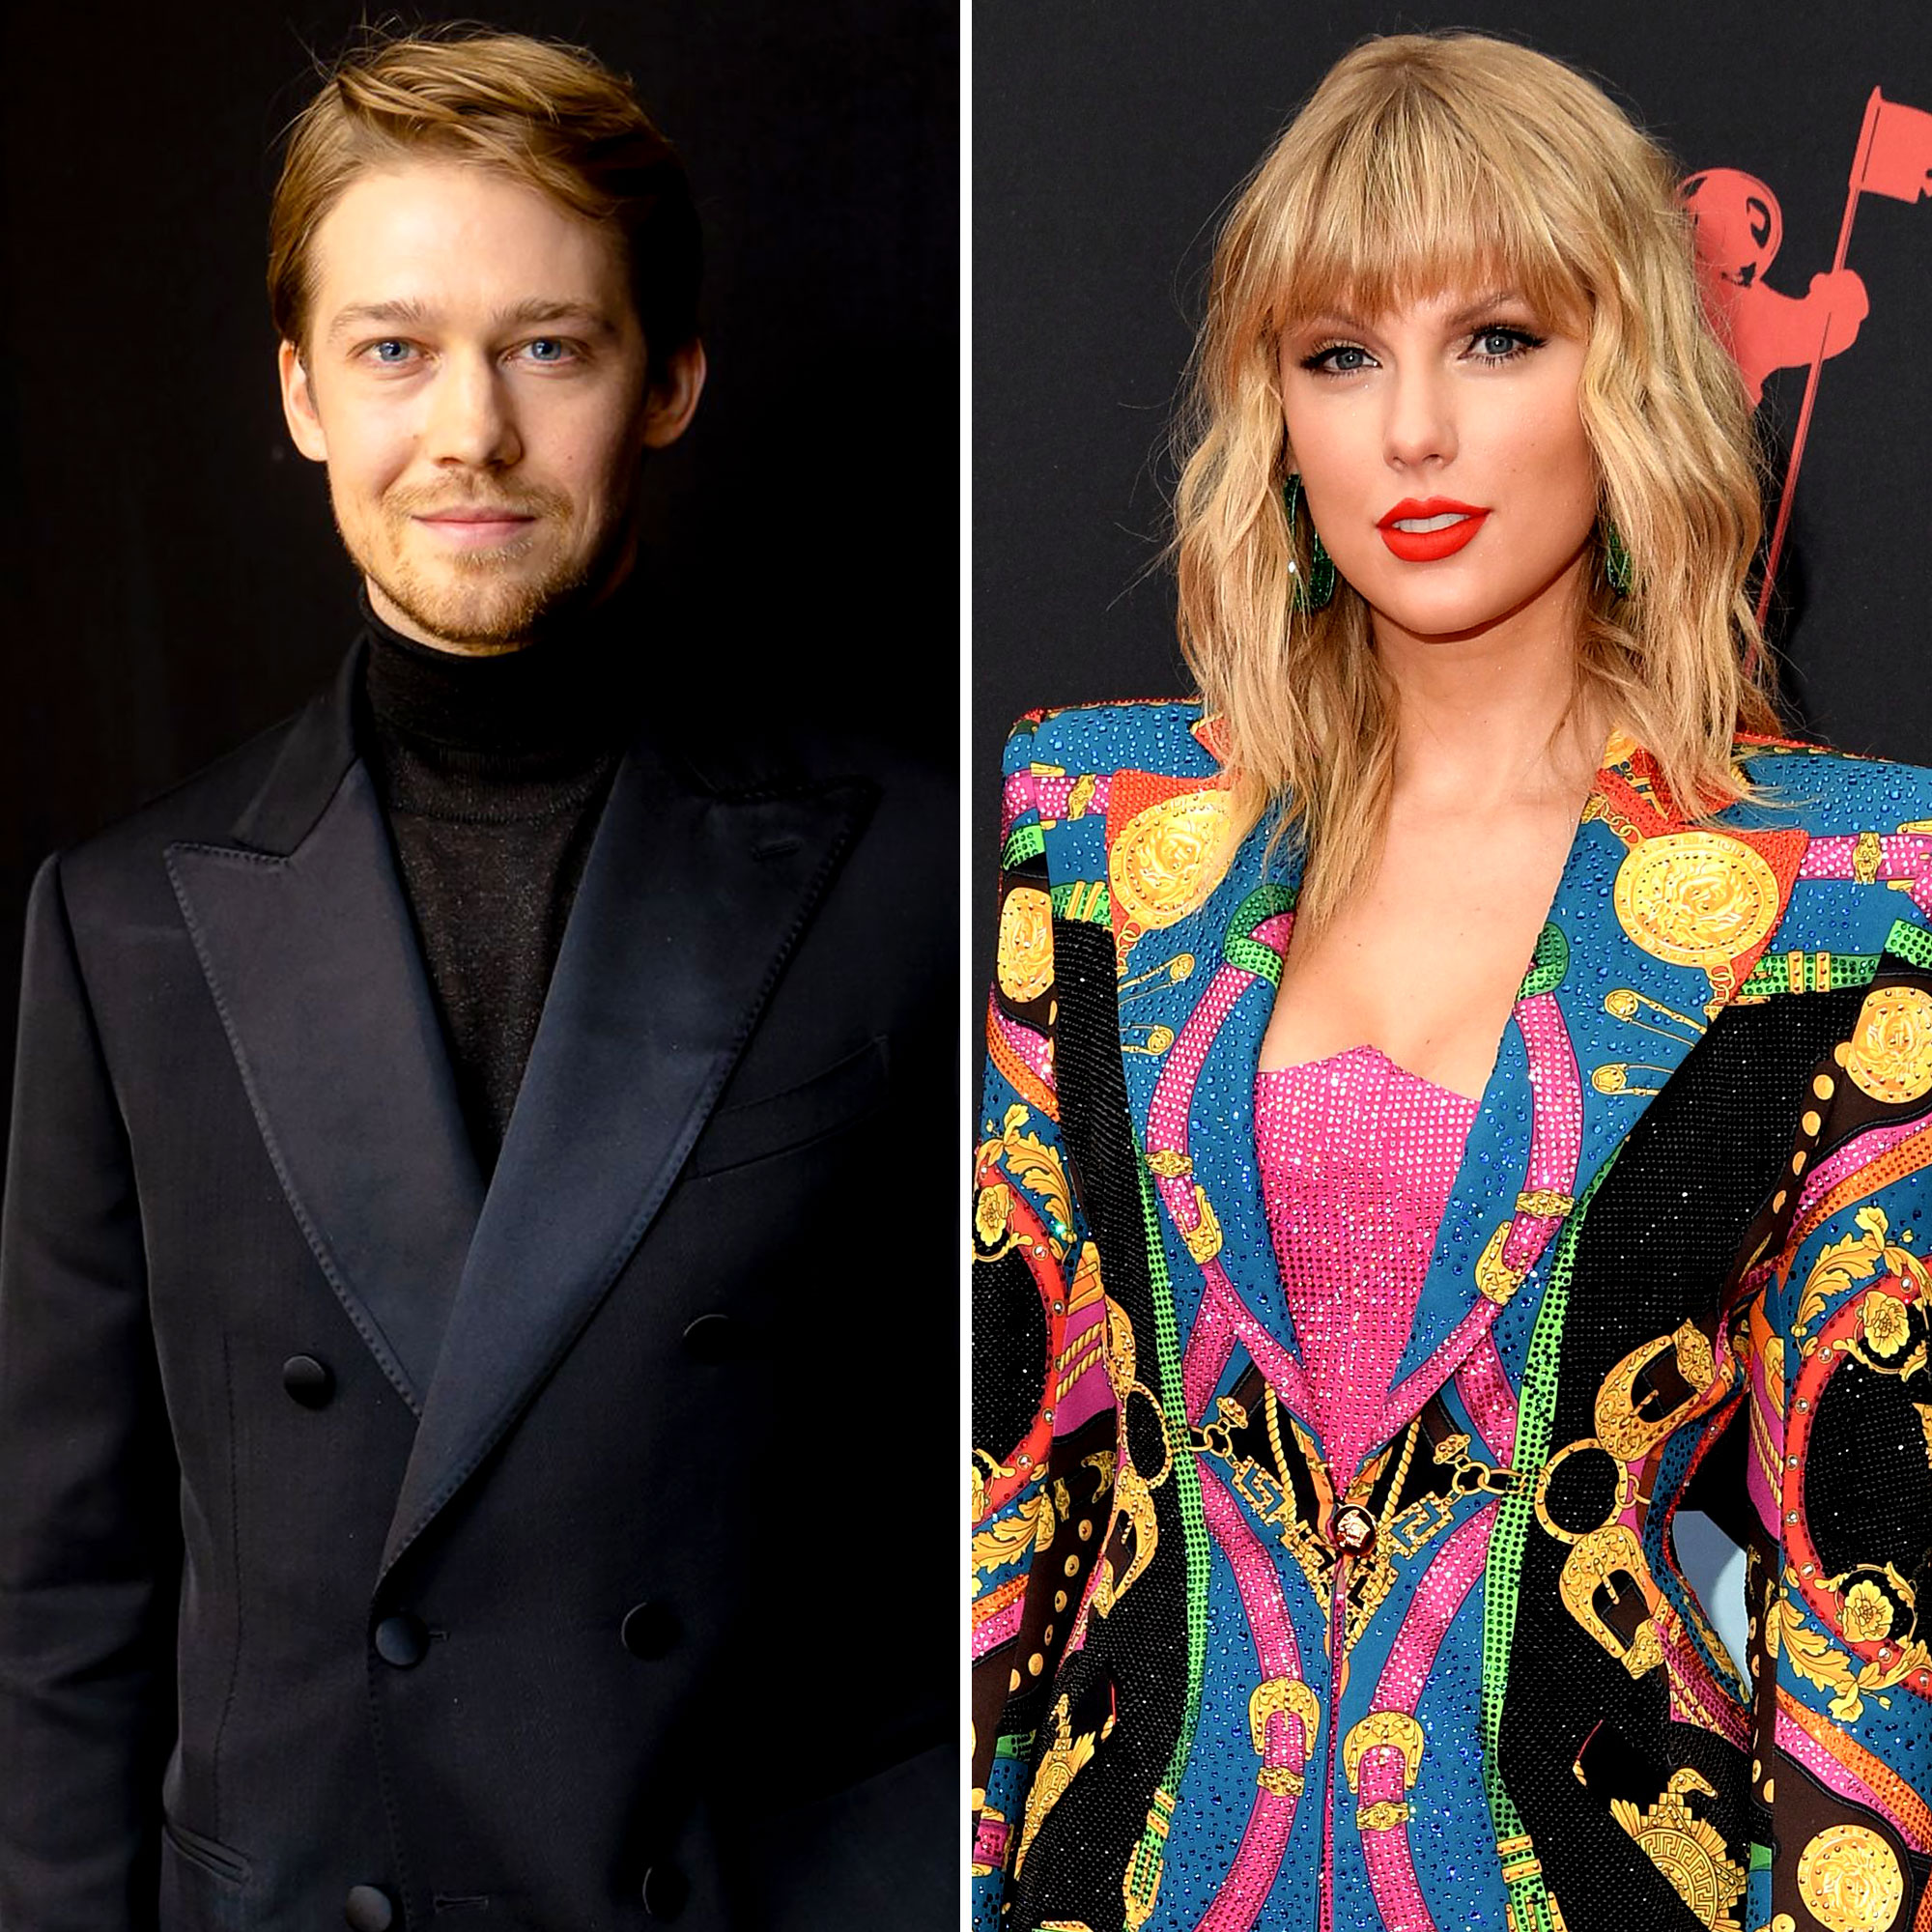 Here's Everything Taylor Swift & Joe Alwyn Have Said About Each